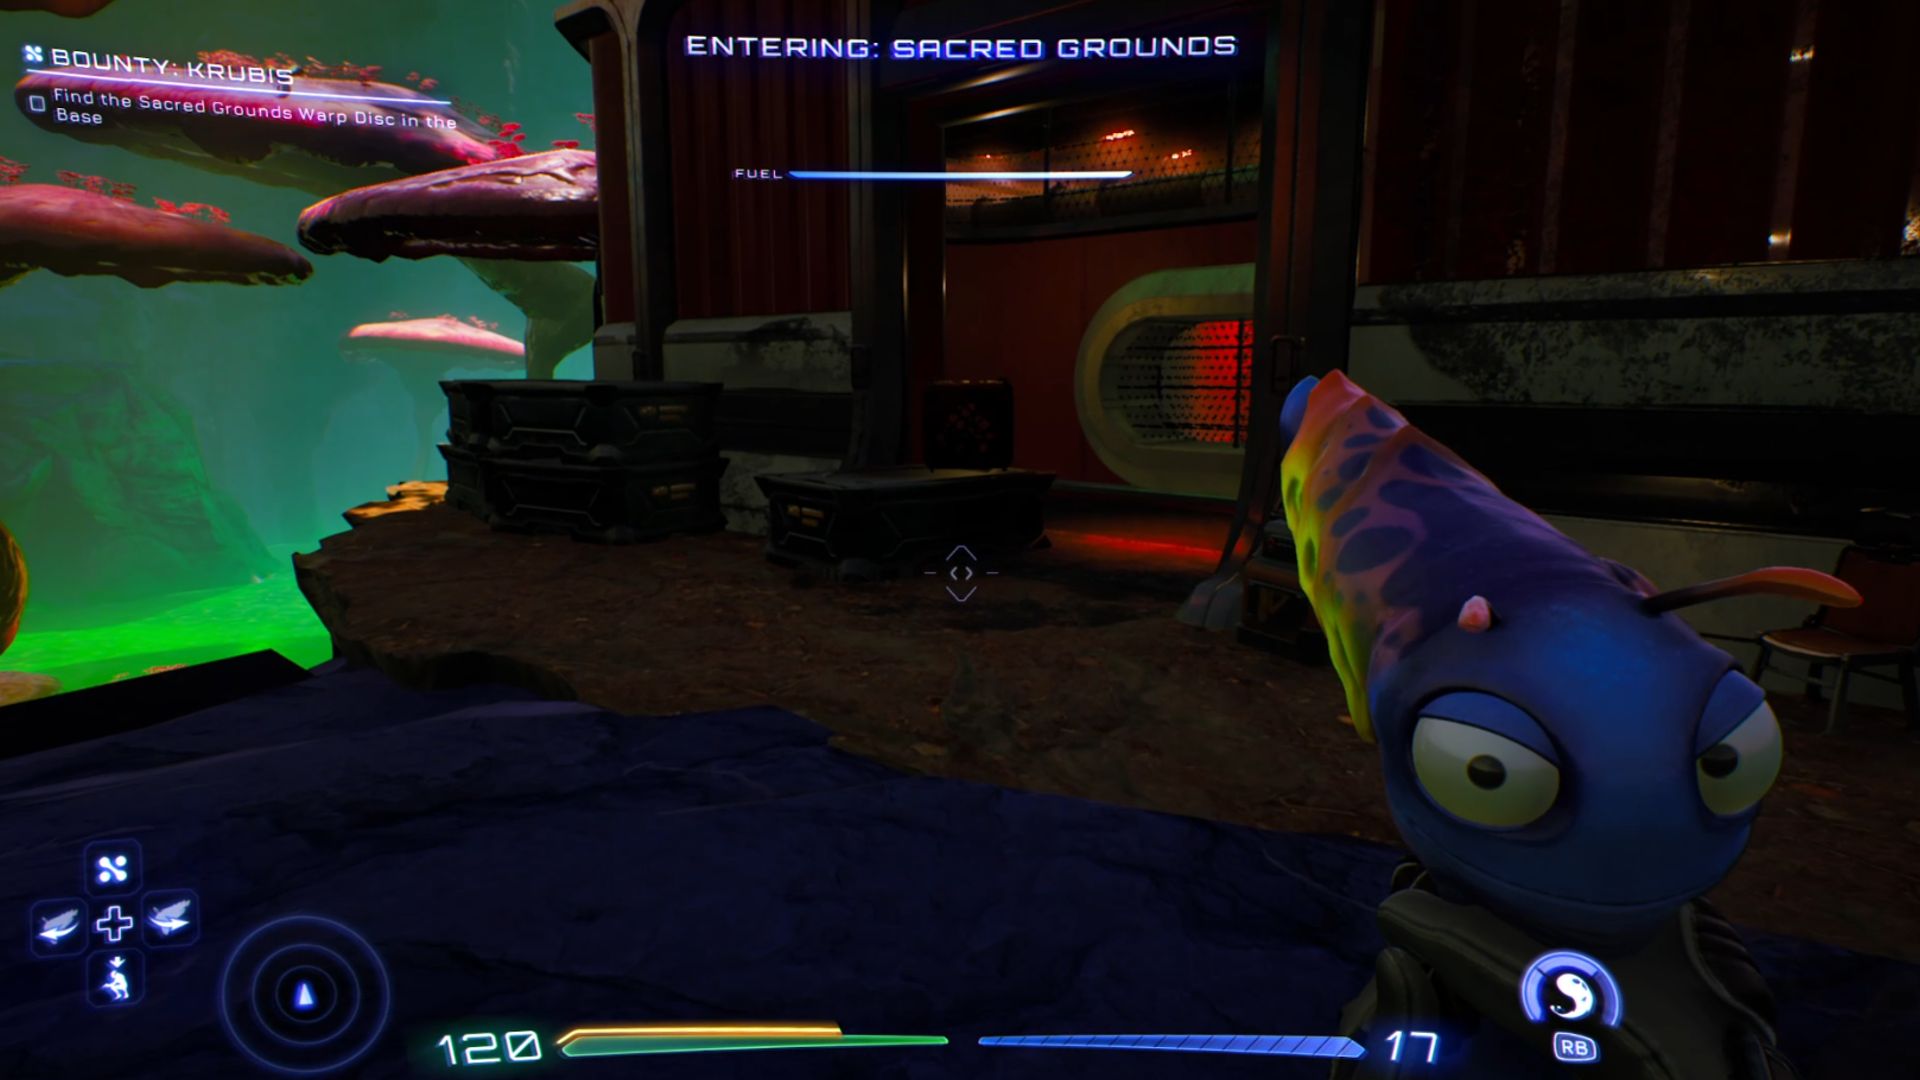 High On Life Warp Discs: The building with the disc can be seen